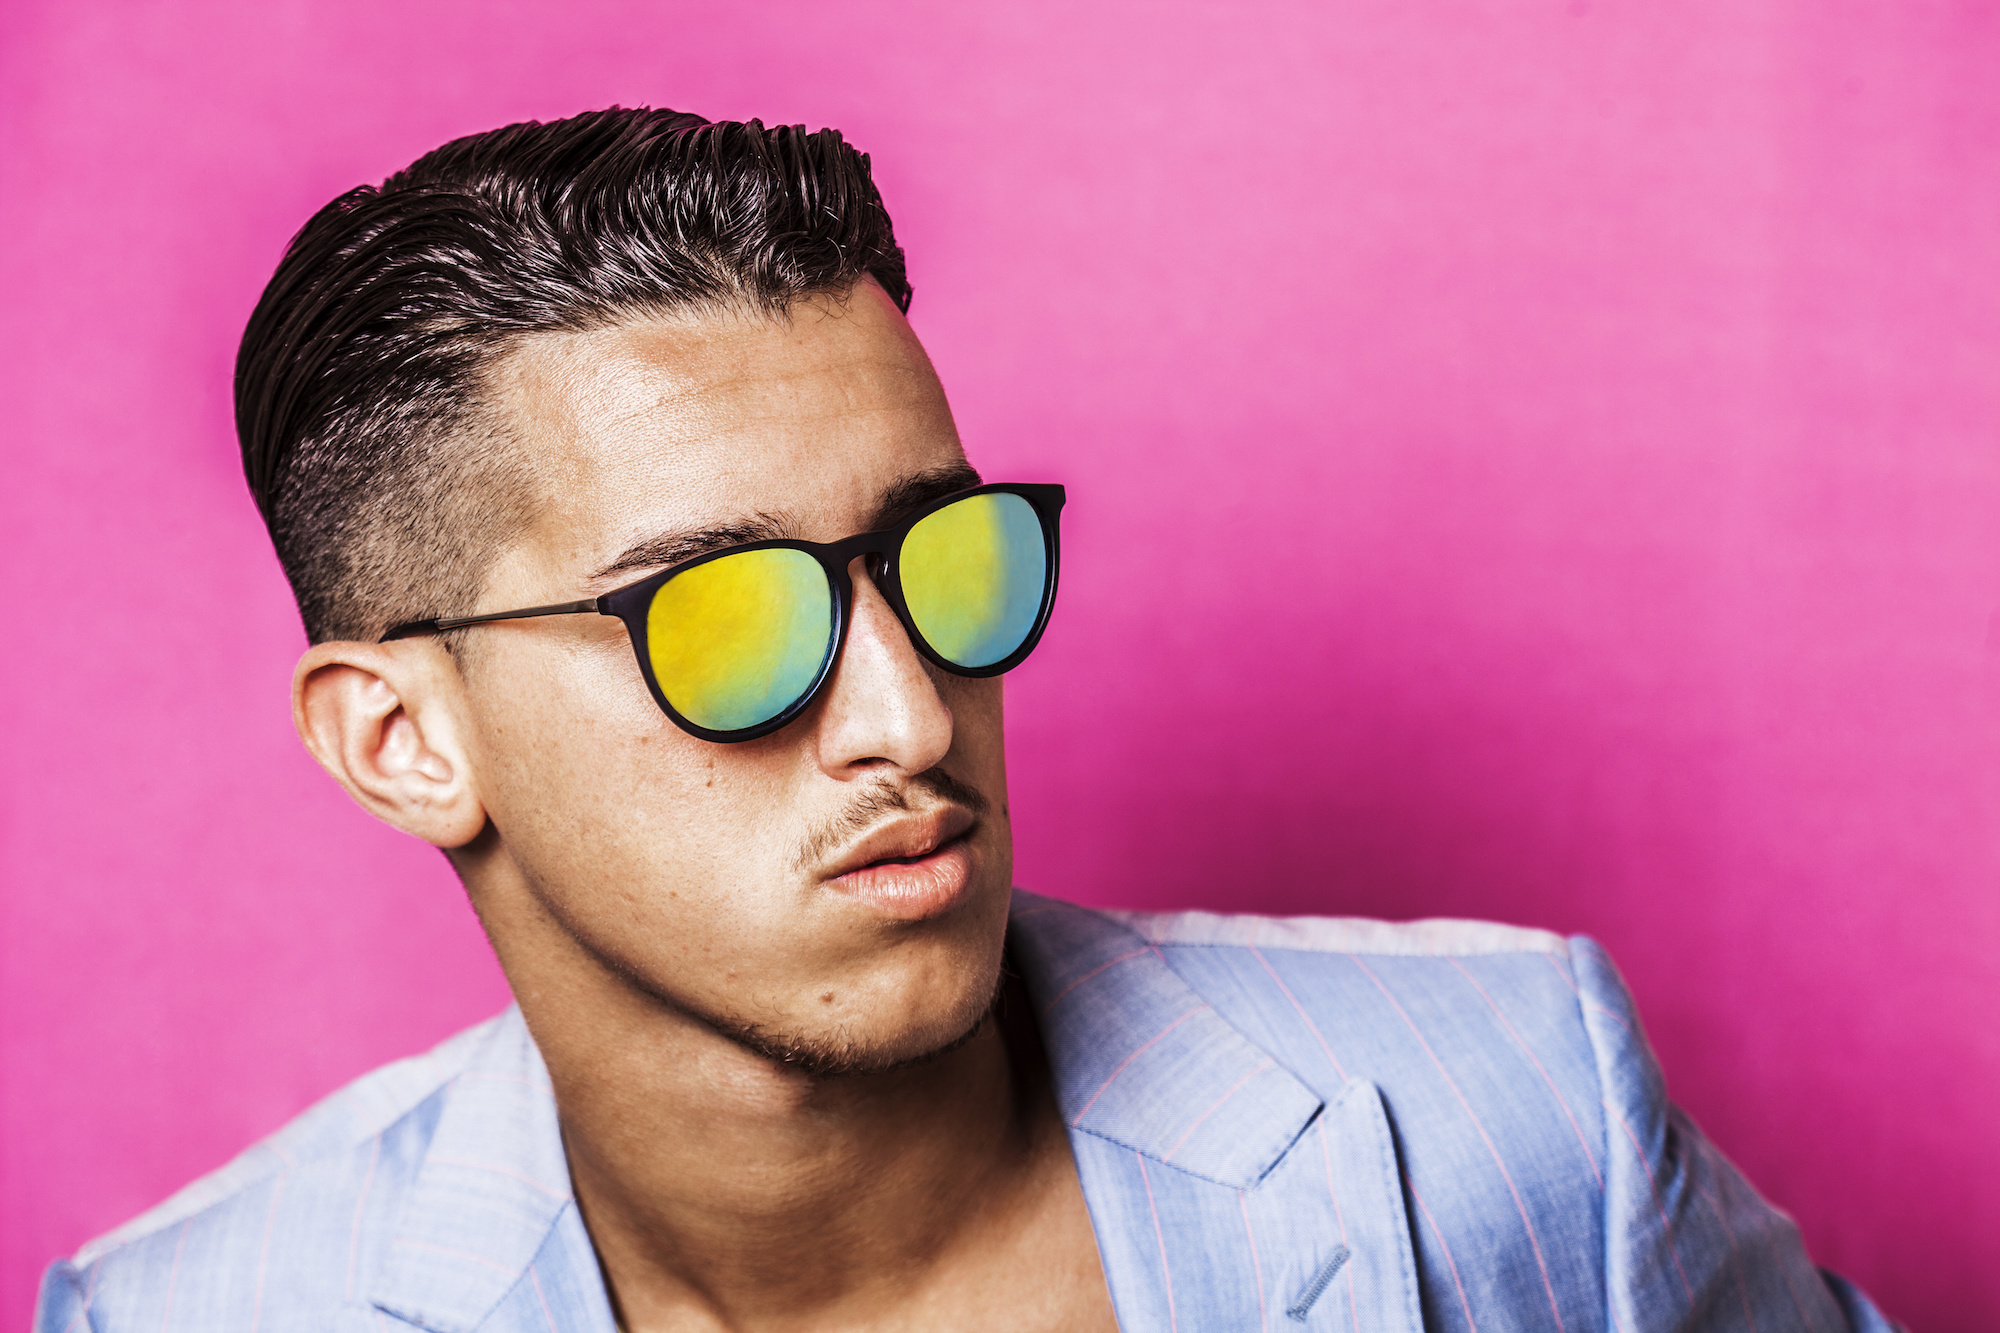 Why Should Sunglasses be Part of your Sun Protection?